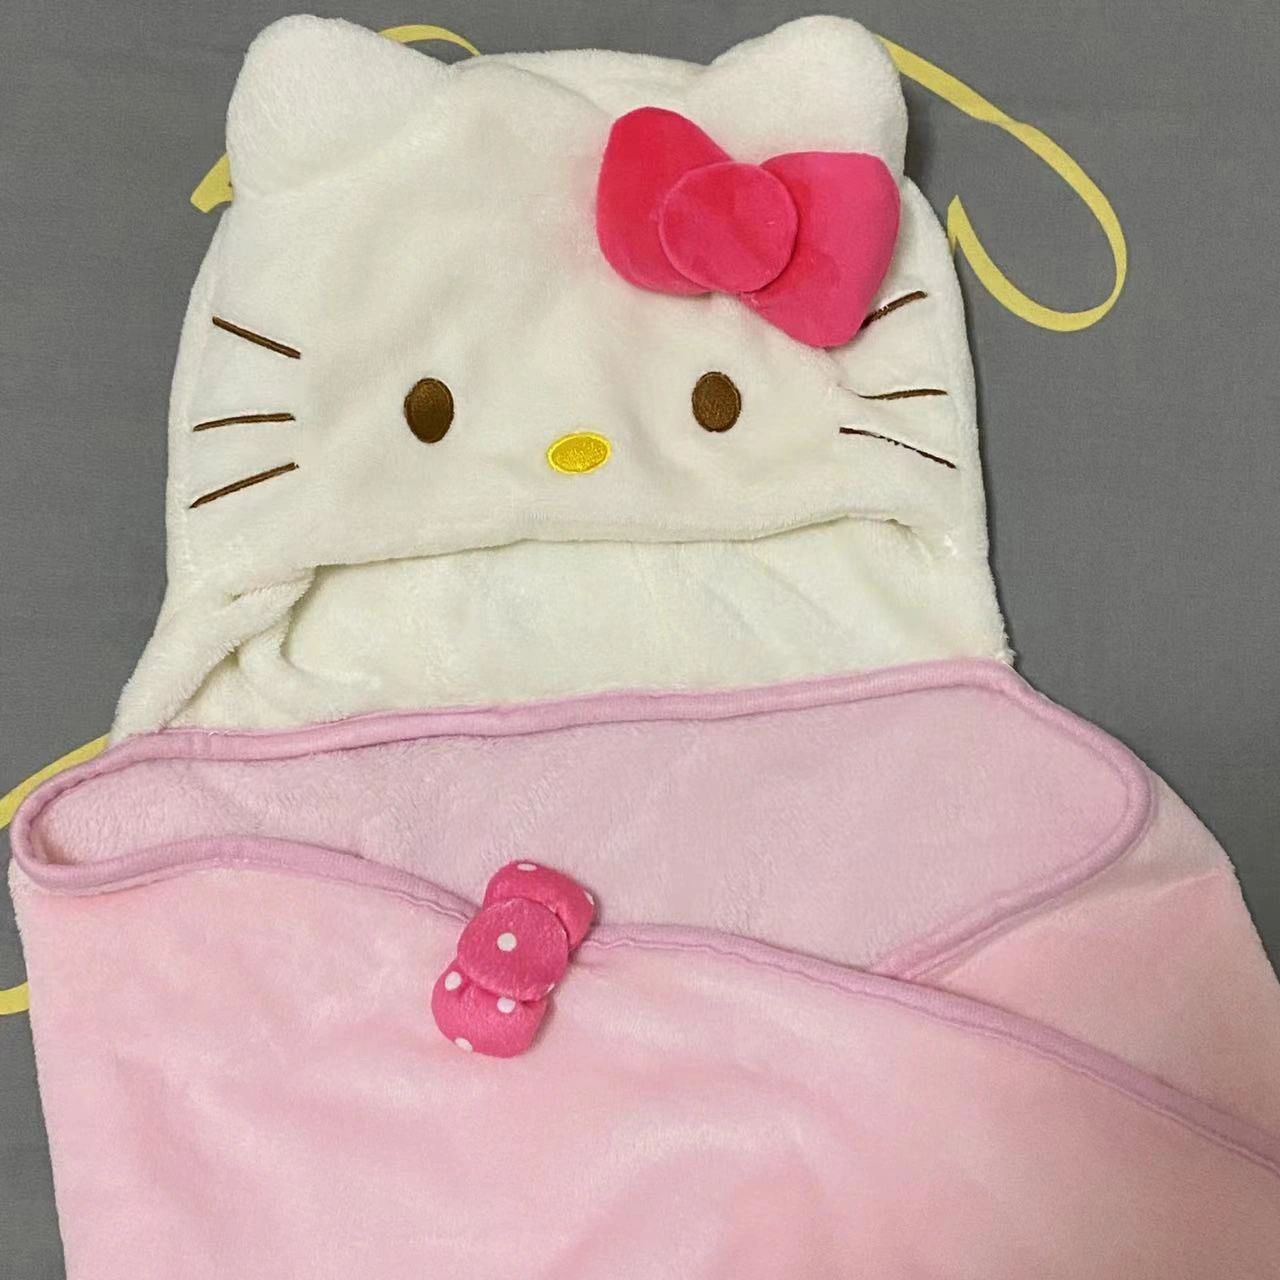 Hellokitty Wearable Hooded Blanket for Adults Fuzzy Warm Cozy Plush Furry Hoodie Throw Cloak Wrap -Gifts for Women Adults and Kids